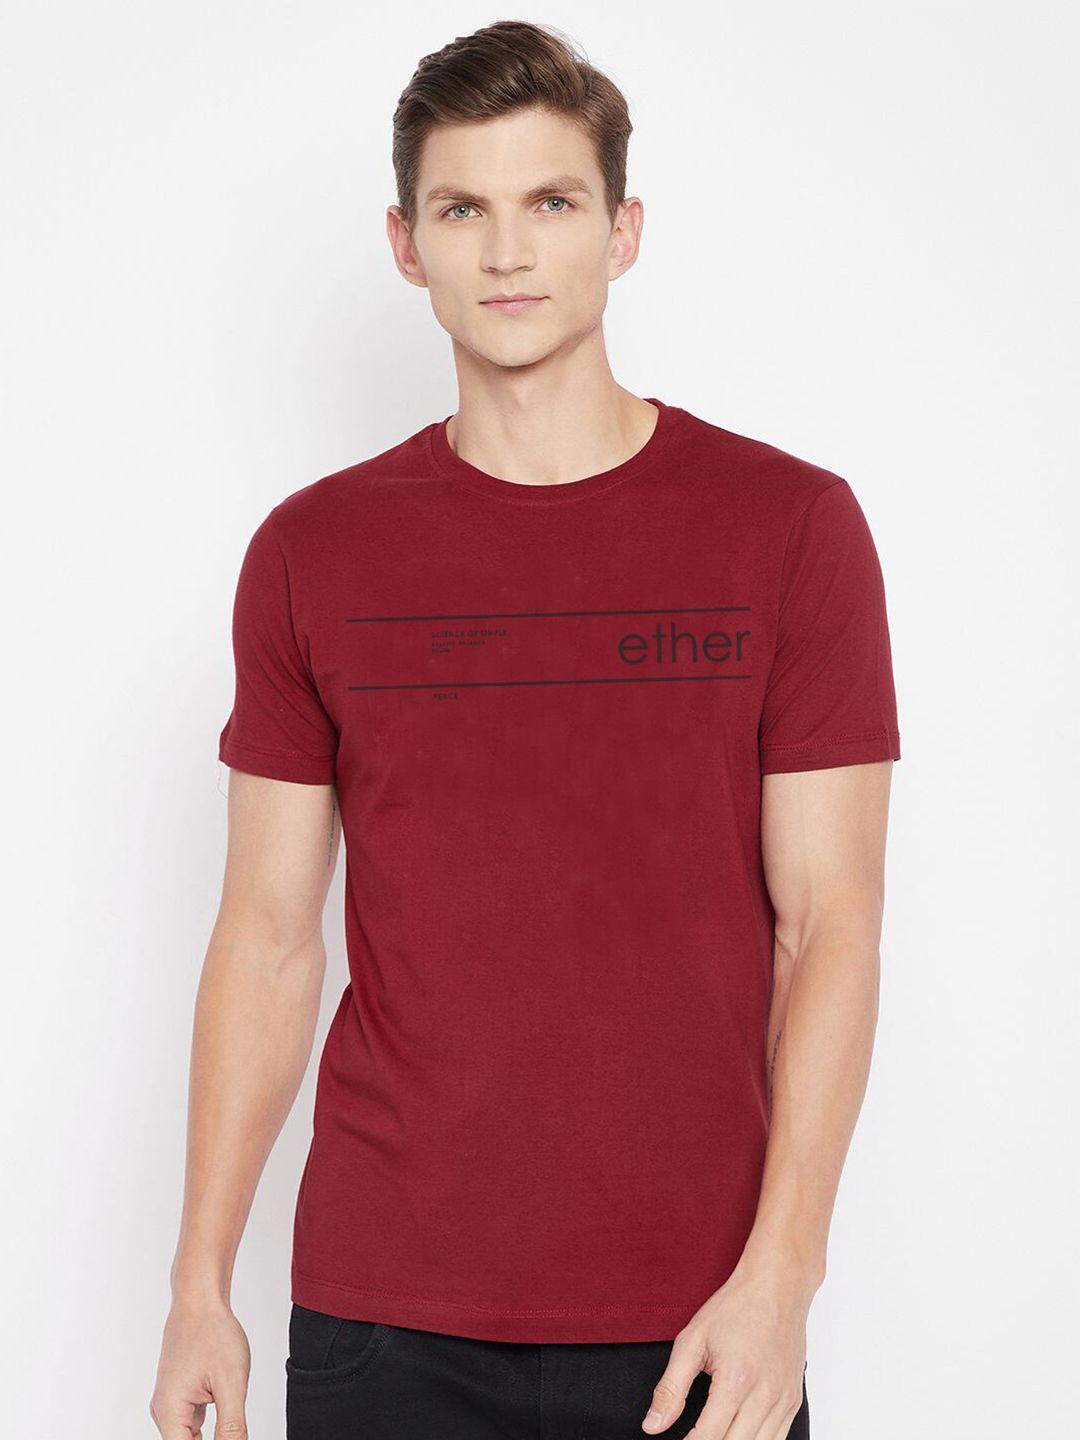 ether men maroon typography printed t-shirt